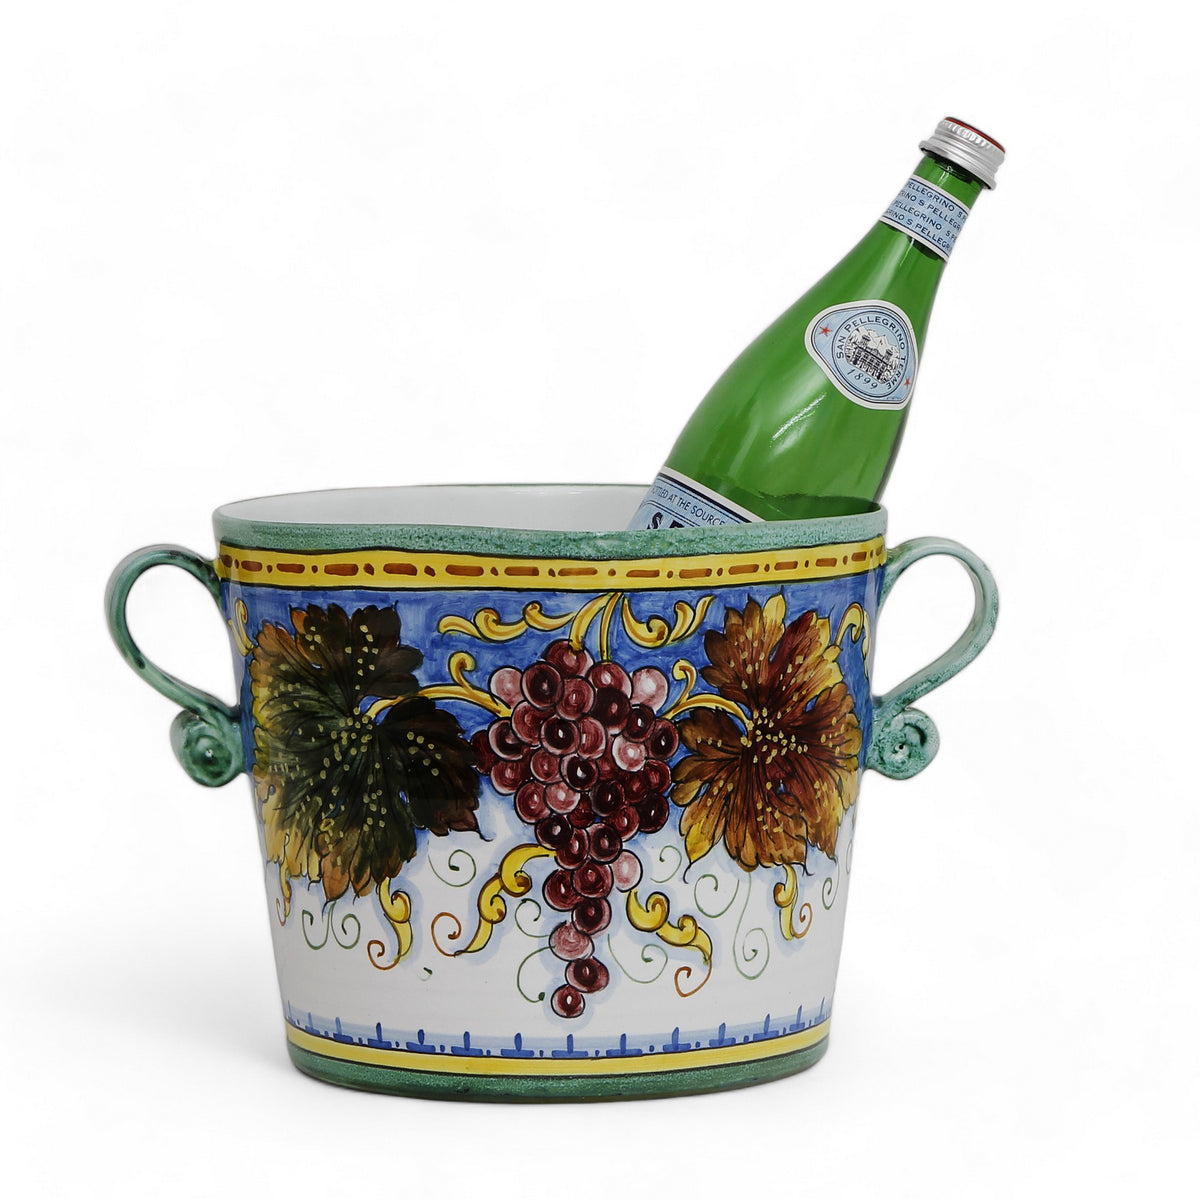 TUSCAN MAJOLICA: Luxury Ice Bucket adorned with traditional Tuscan grape leaves